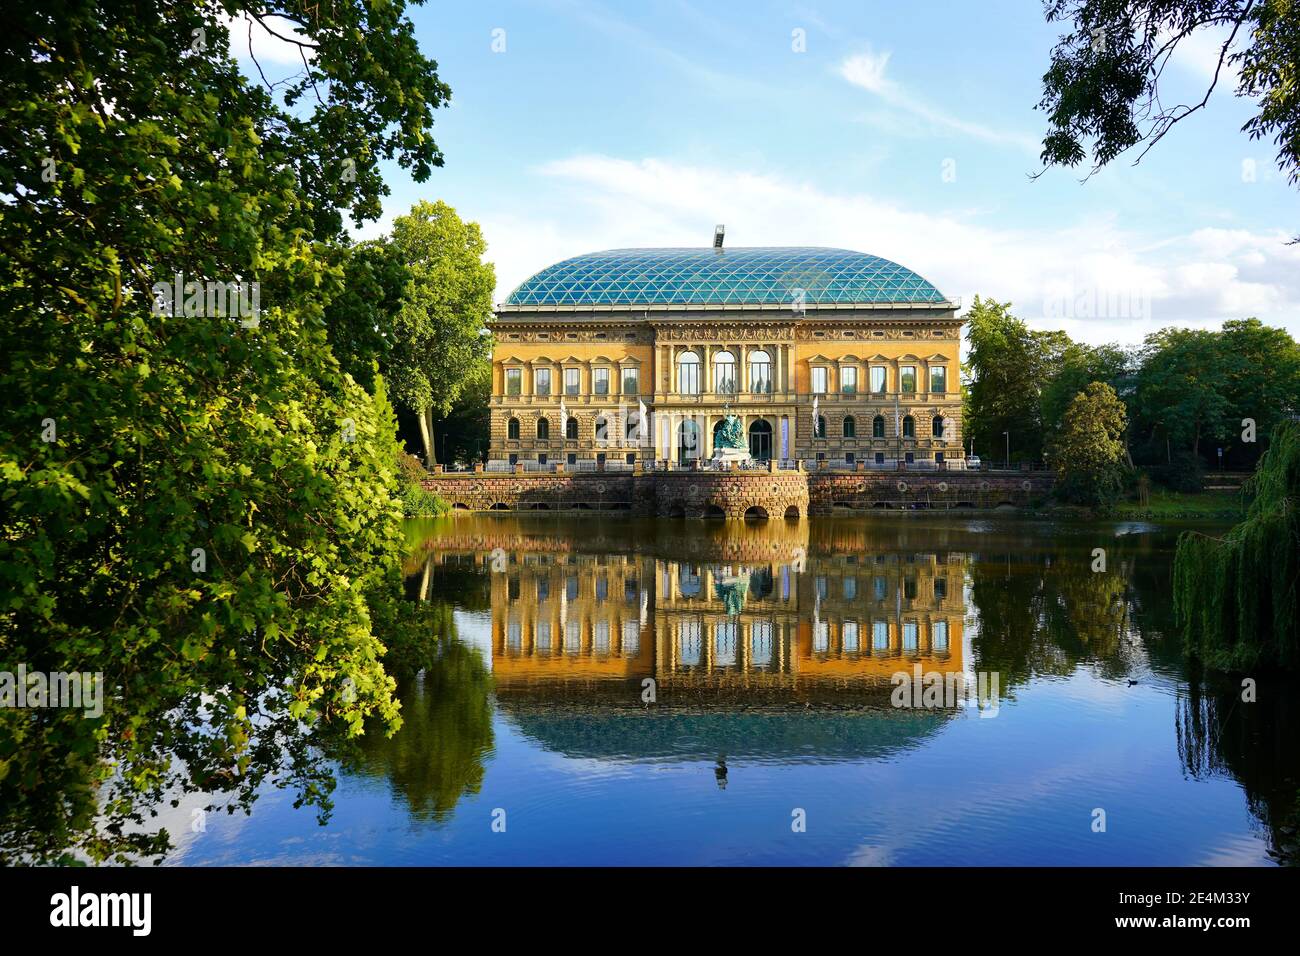 Scenic view of the K21 museum of contemporary art (formerly „Ständehaus“ building), built 1876 - 1880, at 'Kaiserteich' (Emperor's Pond). Stock Photo